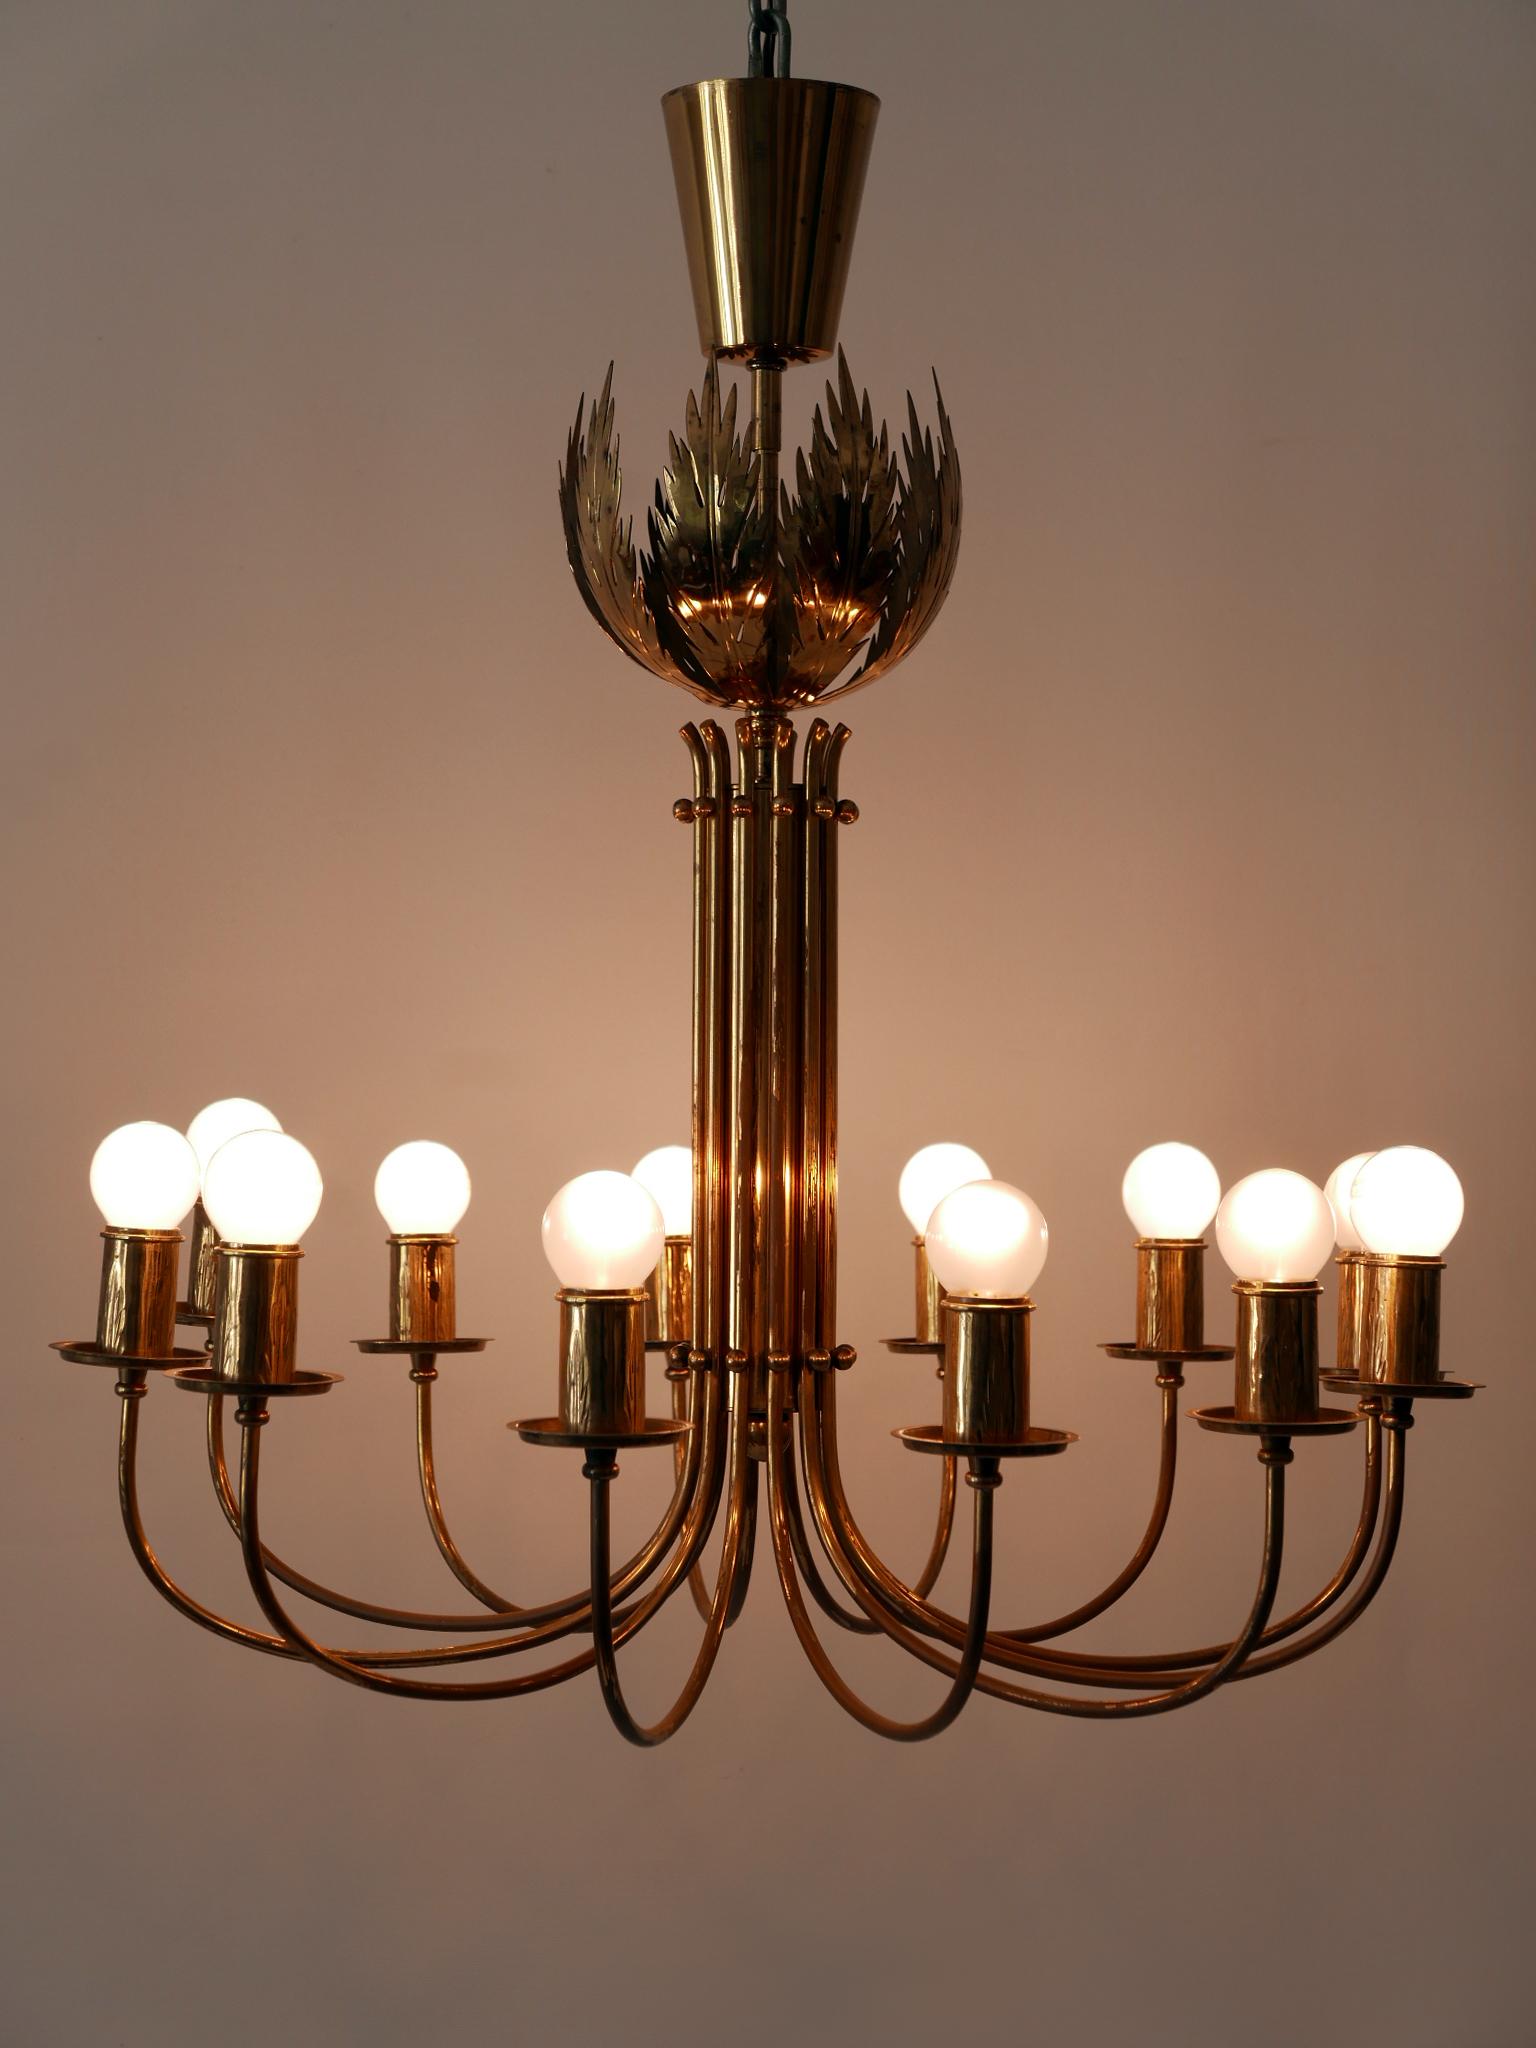 Mid-20th Century Rare 12-Armed Brass Chandeliers or Pendant Lamps by Vereinigte Werkstätten 1950s For Sale